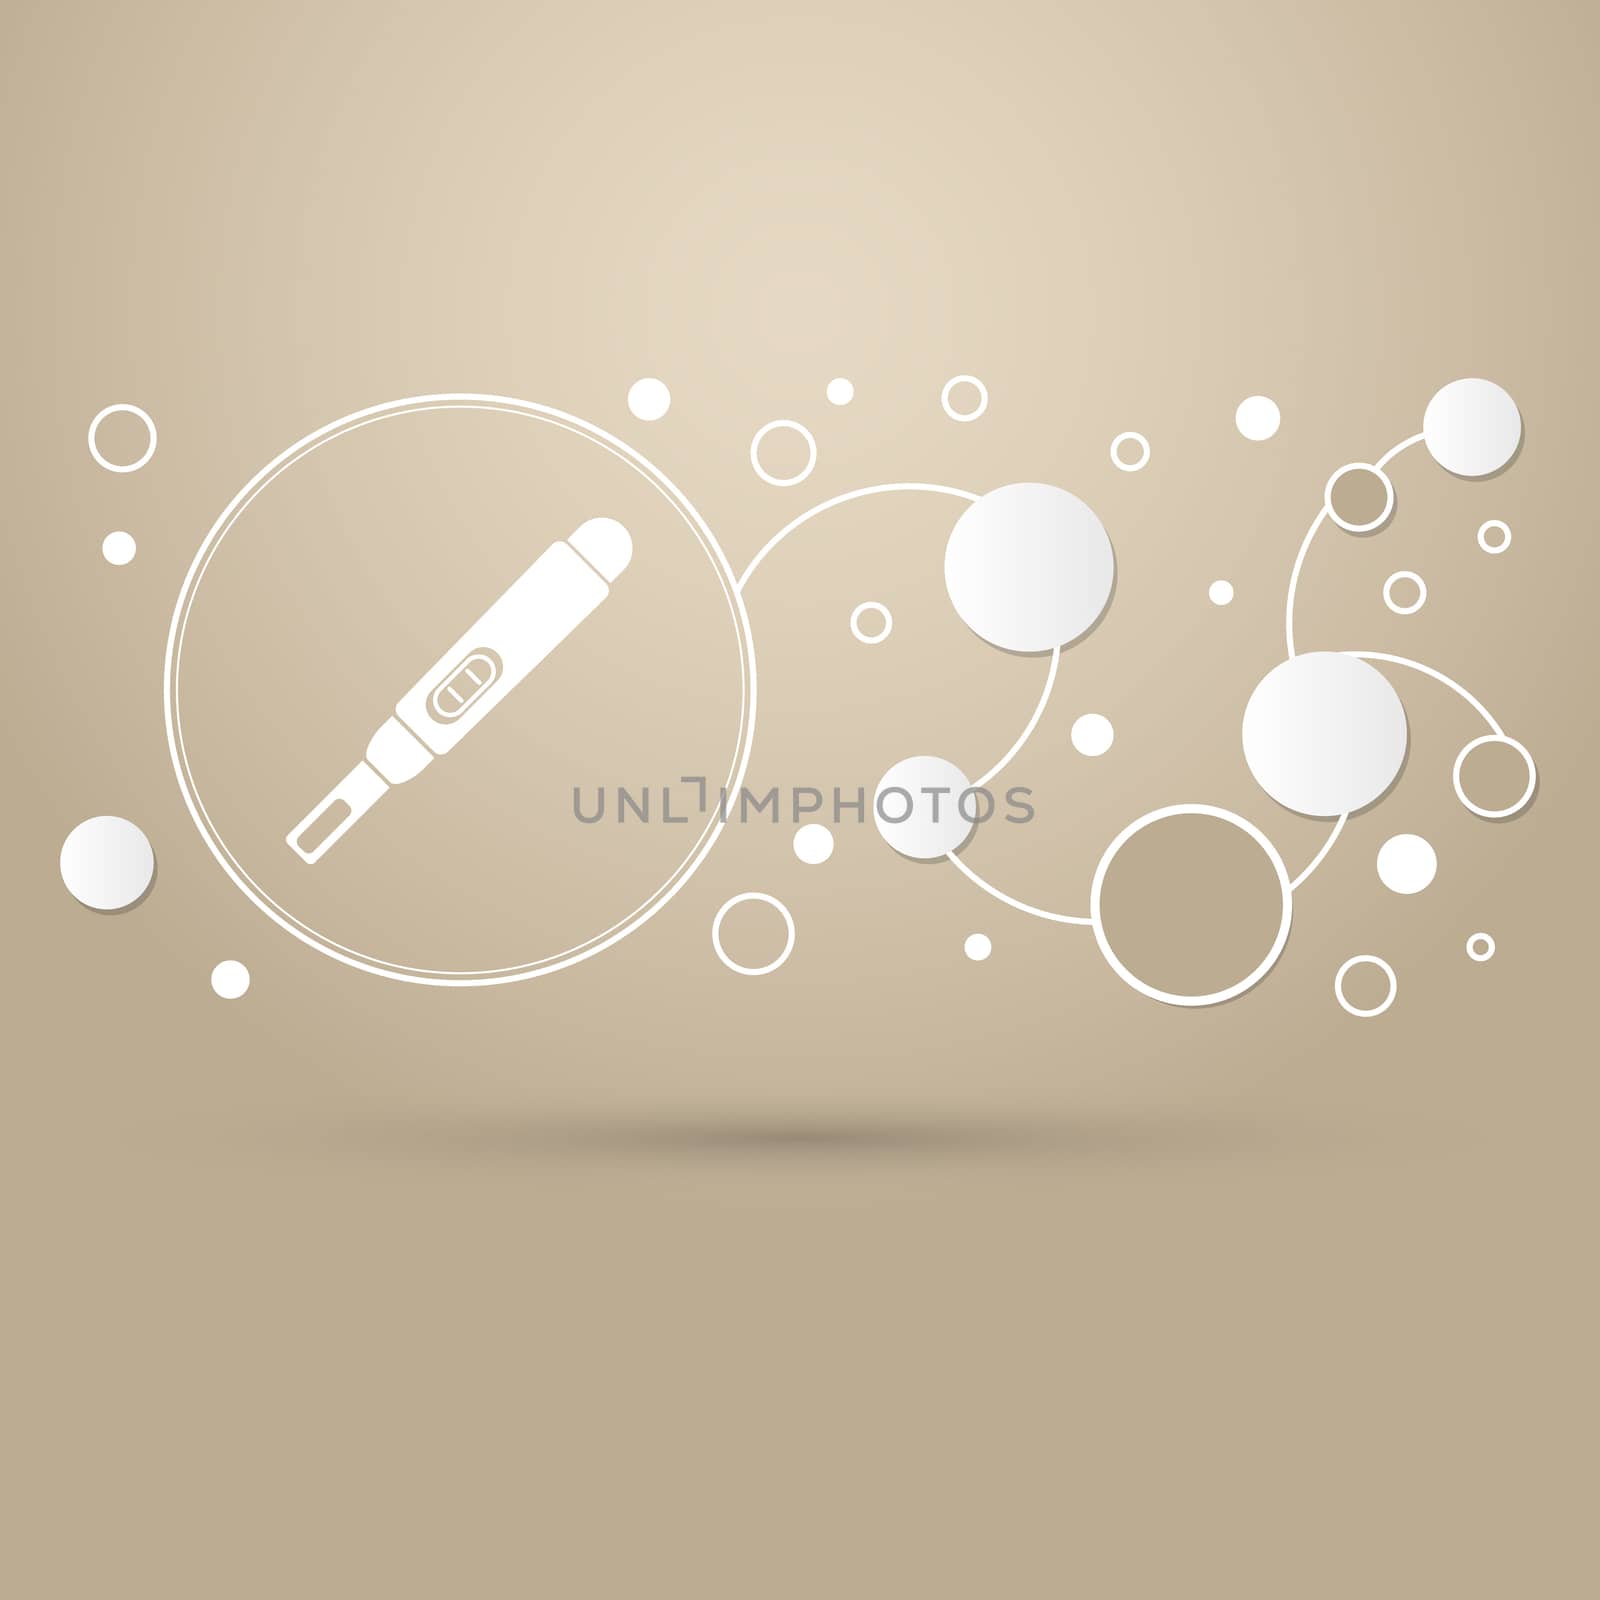 Pregnancy test icon on a brown background with elegant style and modern design infographic.  by Adamchuk